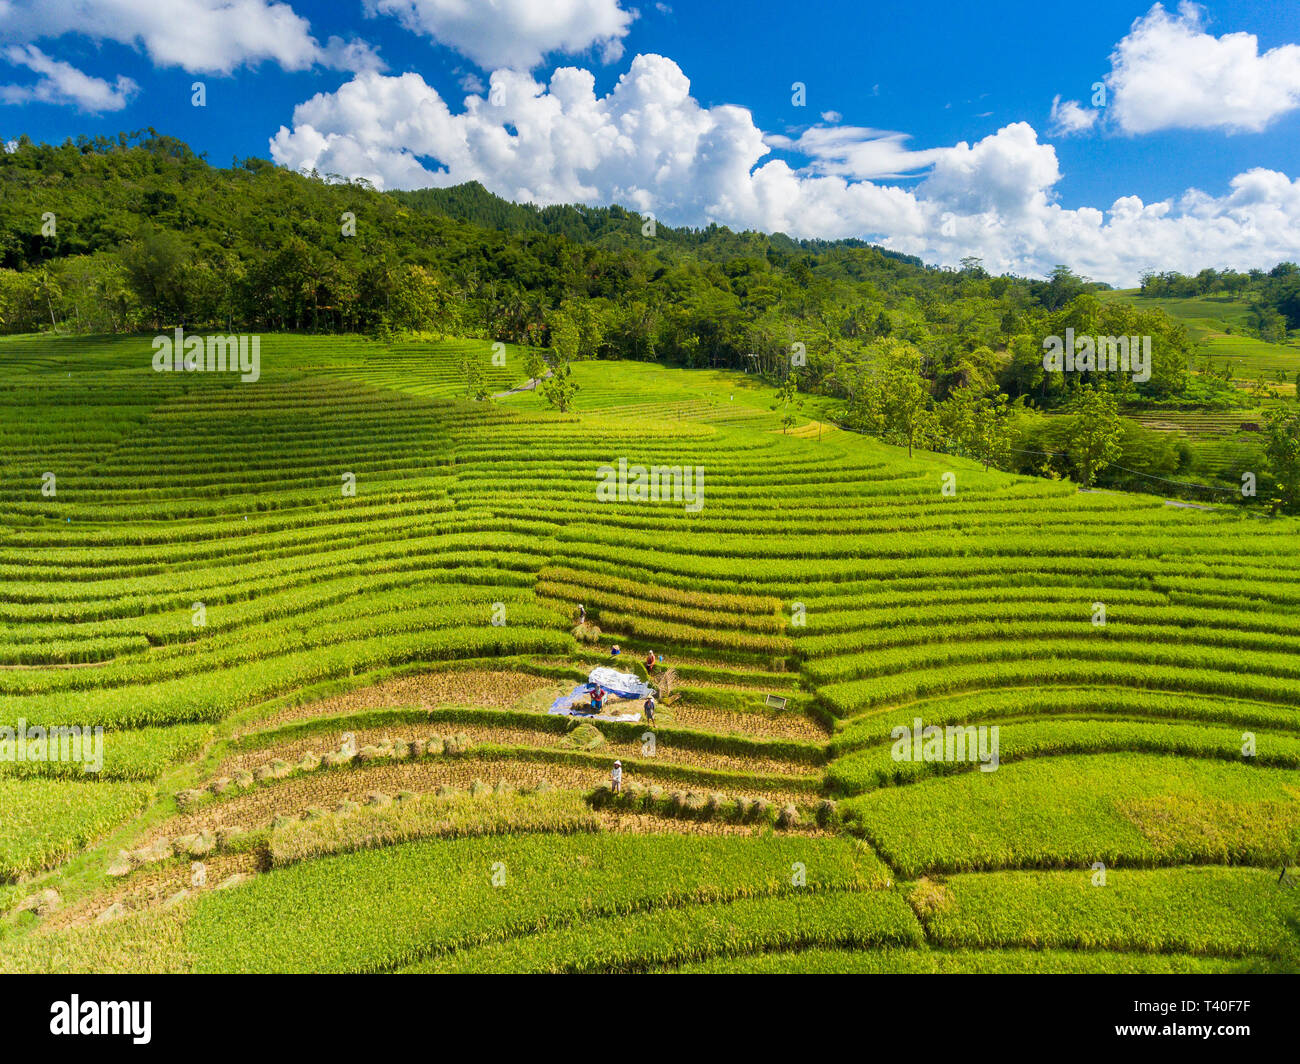 Beautiful landscape of paddy rice fields with some farmers harvesting Stock Photo